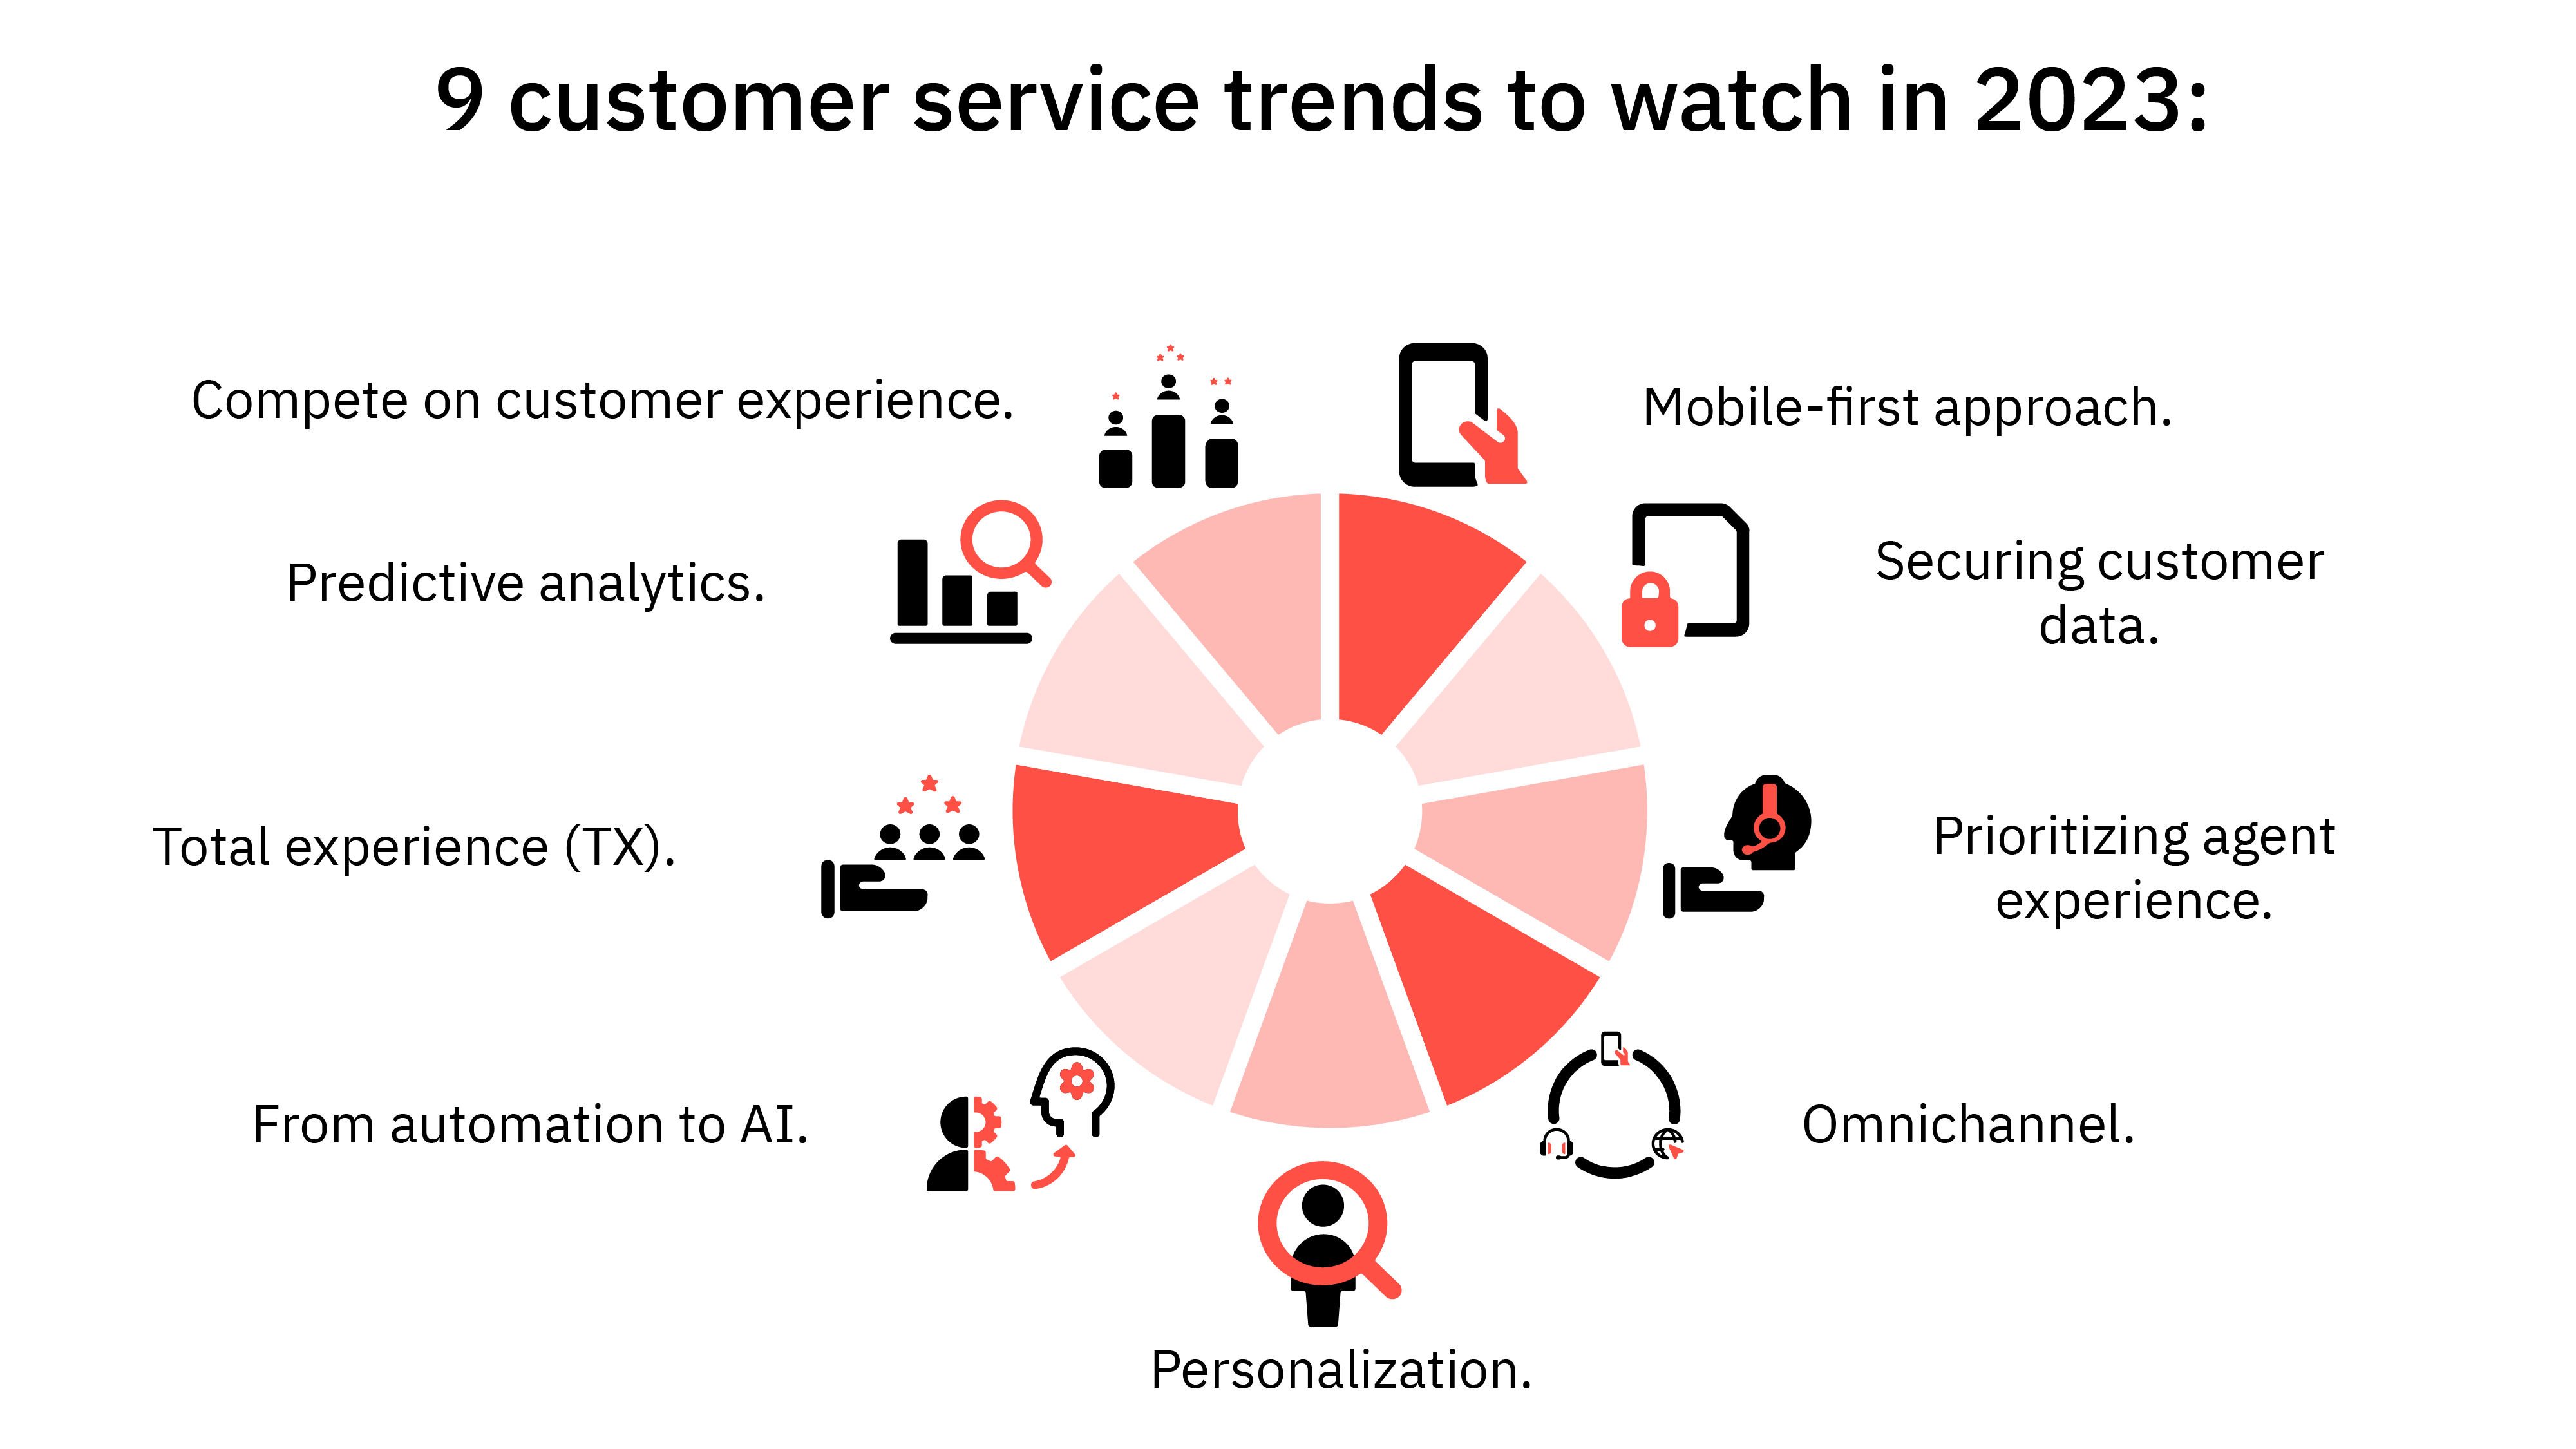 9 customer service trends to watch in 2023